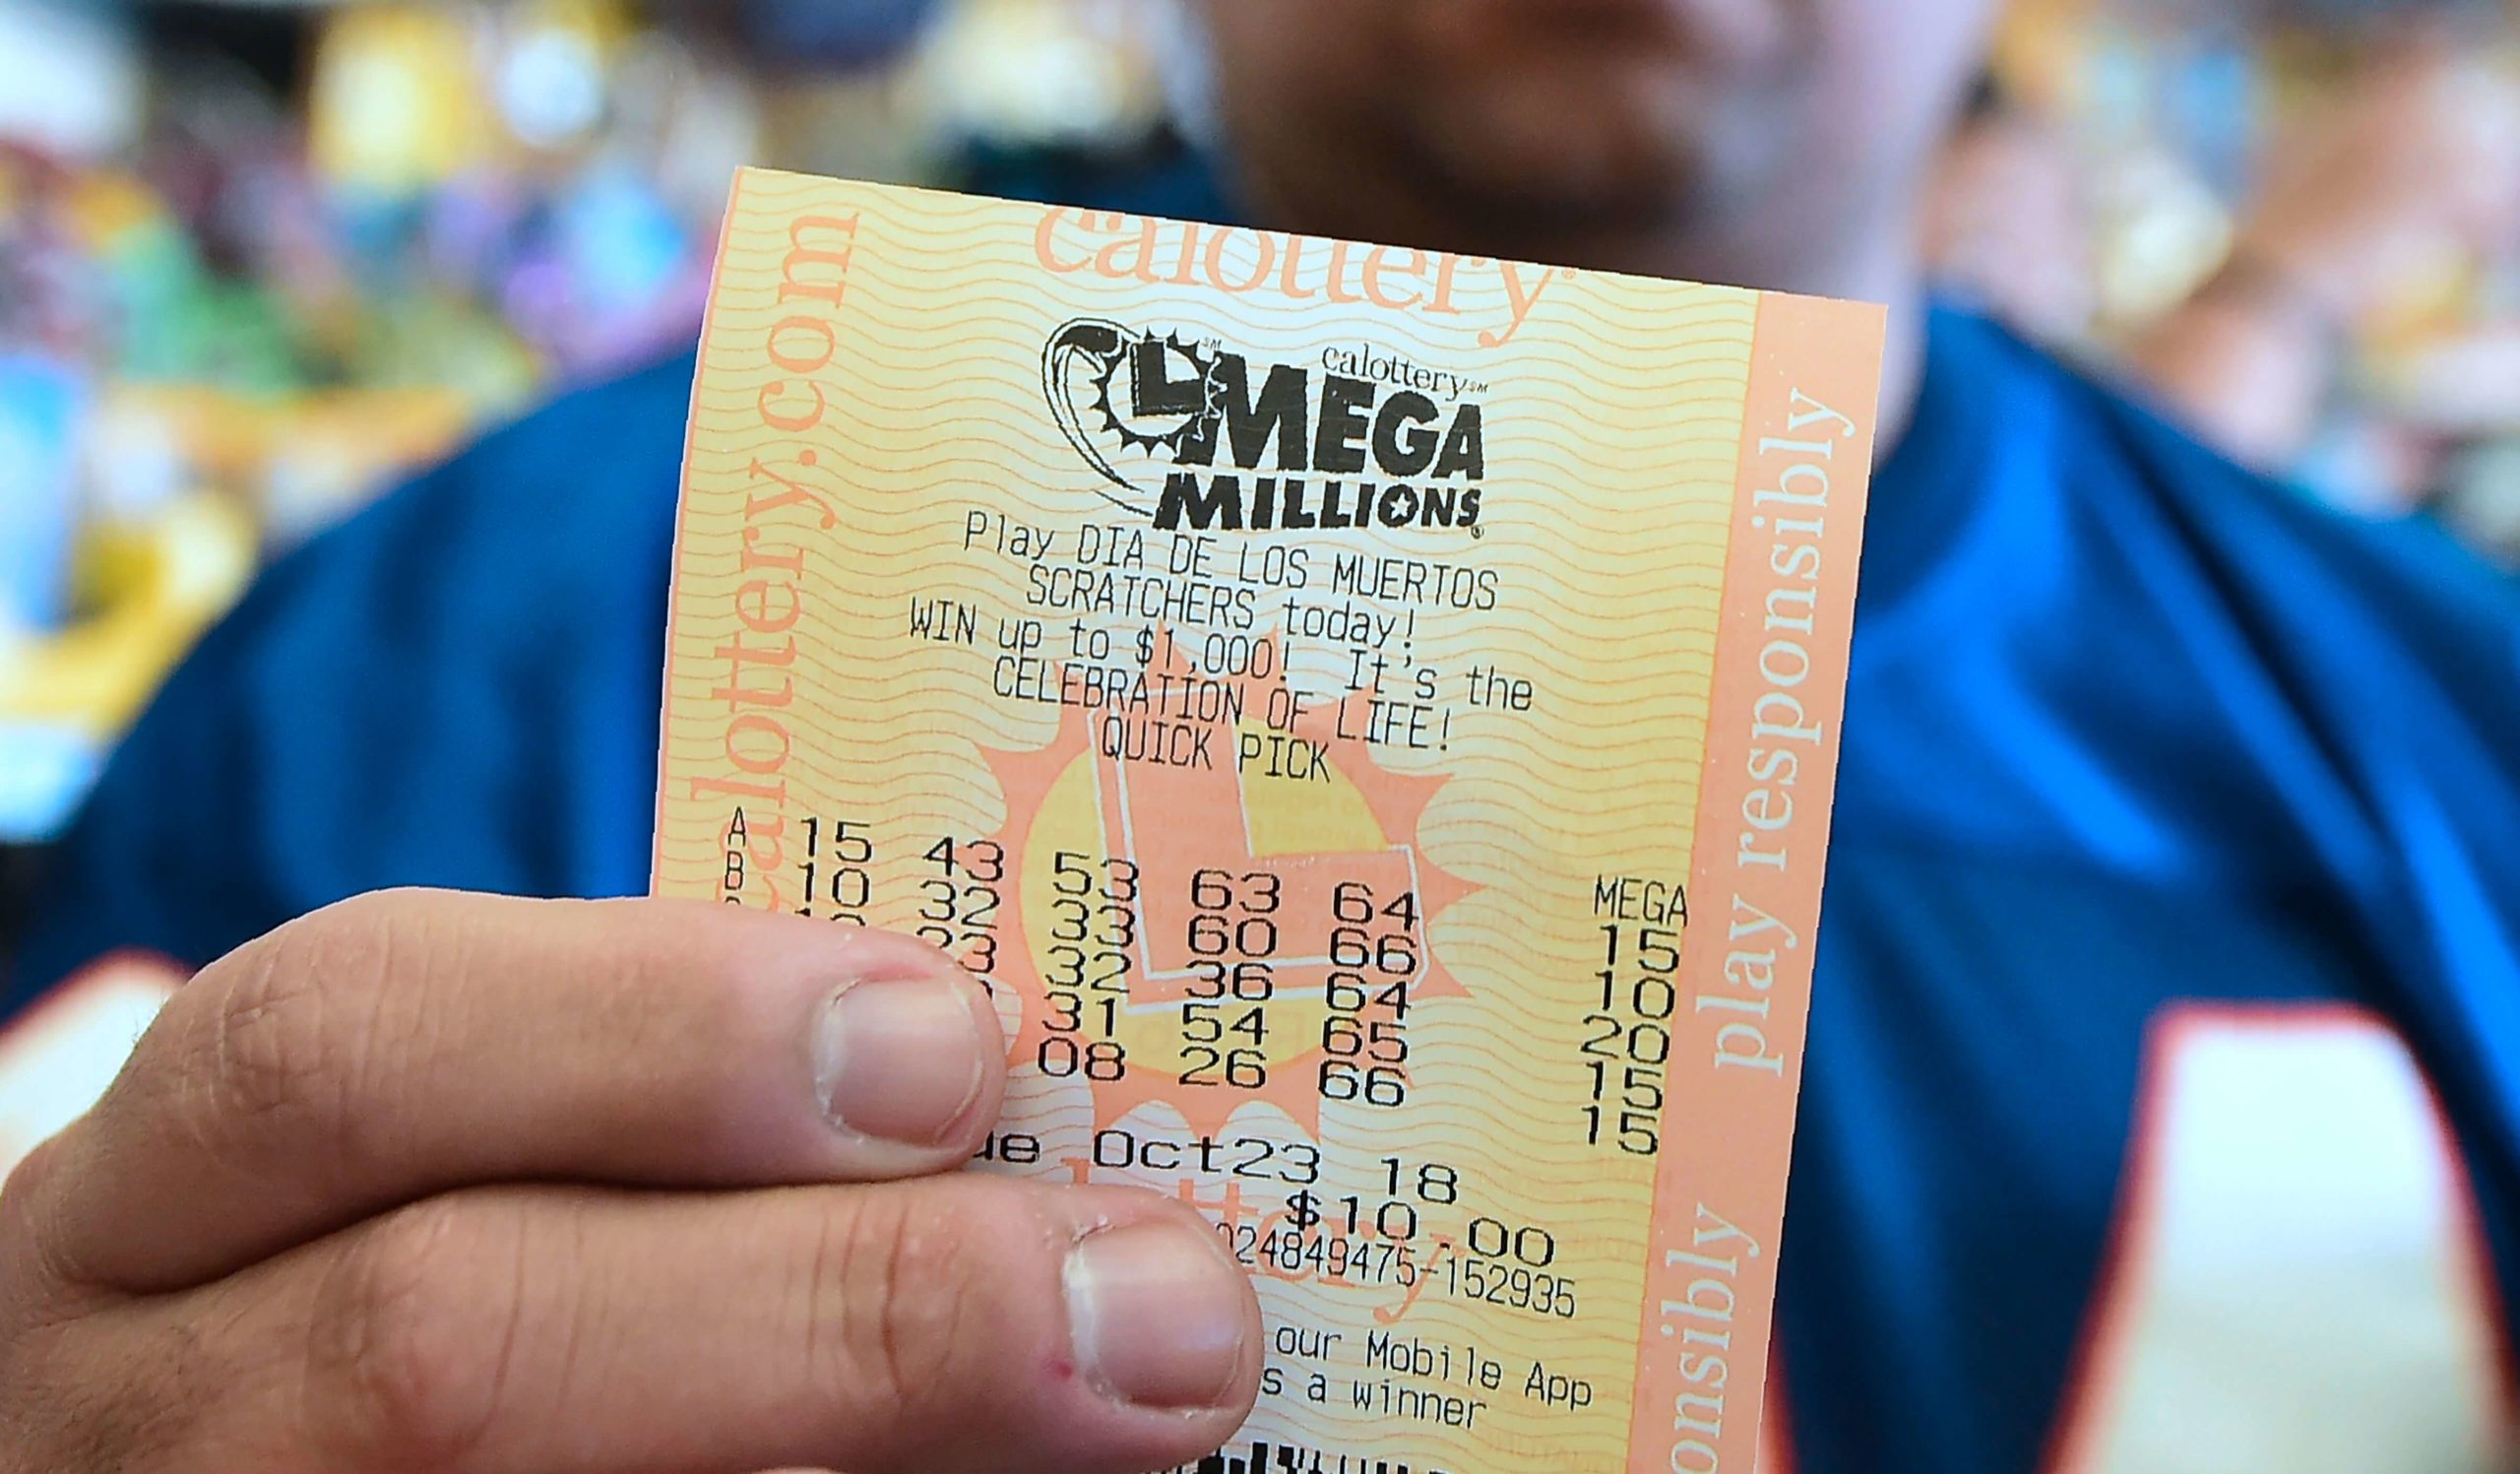 A man shows his just purchased lottery tickets from the Blue Bird Liquor store in Hawthorne, California on October 23, 2018 ahead of the drawing tonight for the Mega Millions jackpot, now reaching USD 1.6 billion. (Photo by Frederic J. BROWN / AFP)        (Photo credit should read FREDERIC J. BROWN/AFP/Getty Images)